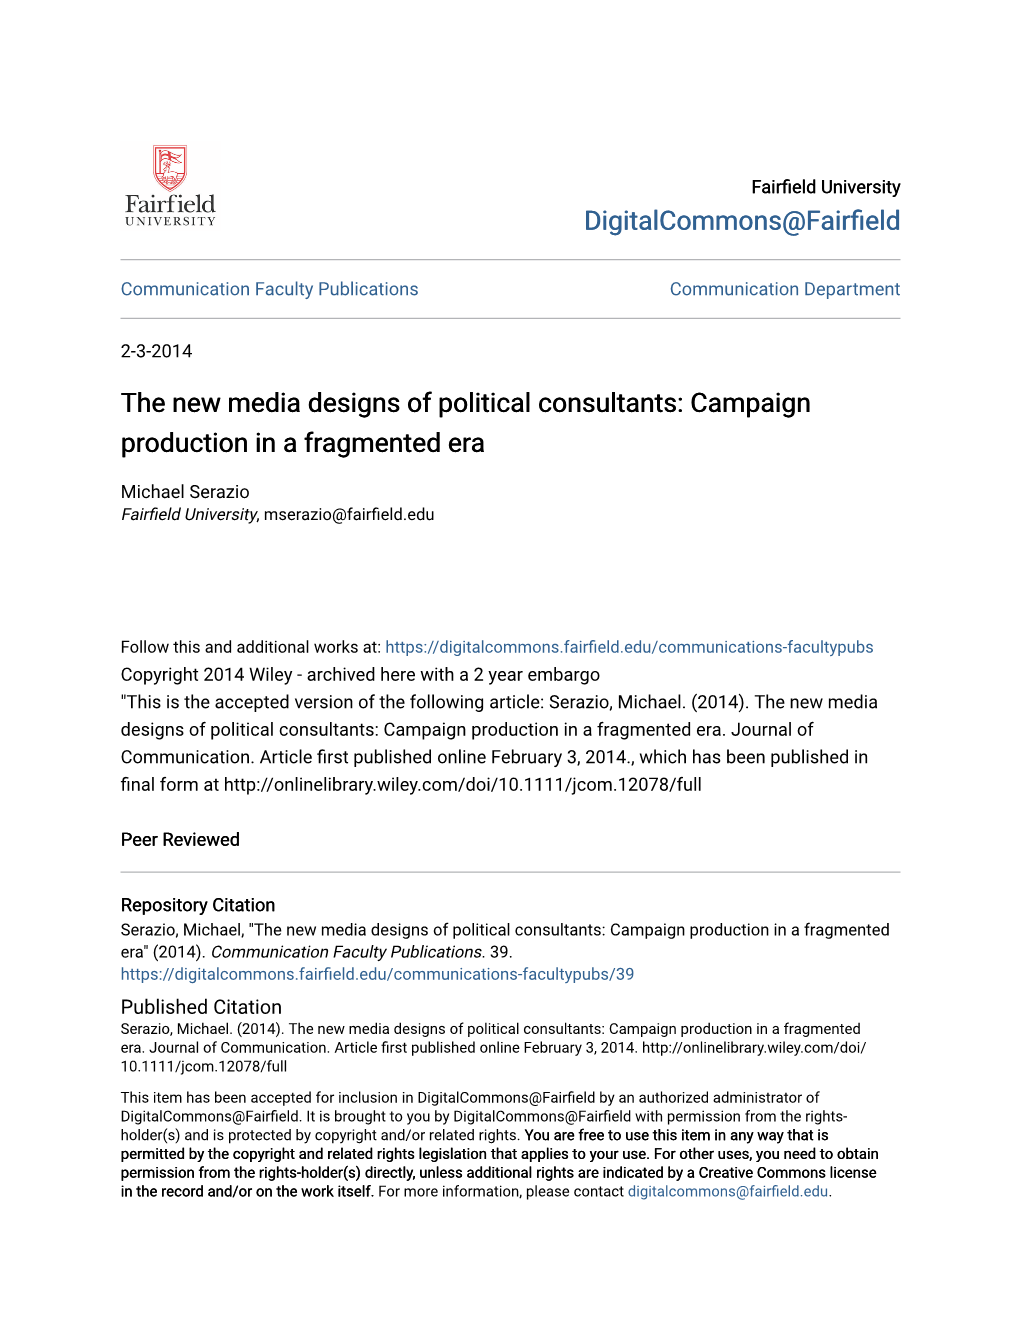 The New Media Designs of Political Consultants: Campaign Production in a Fragmented Era